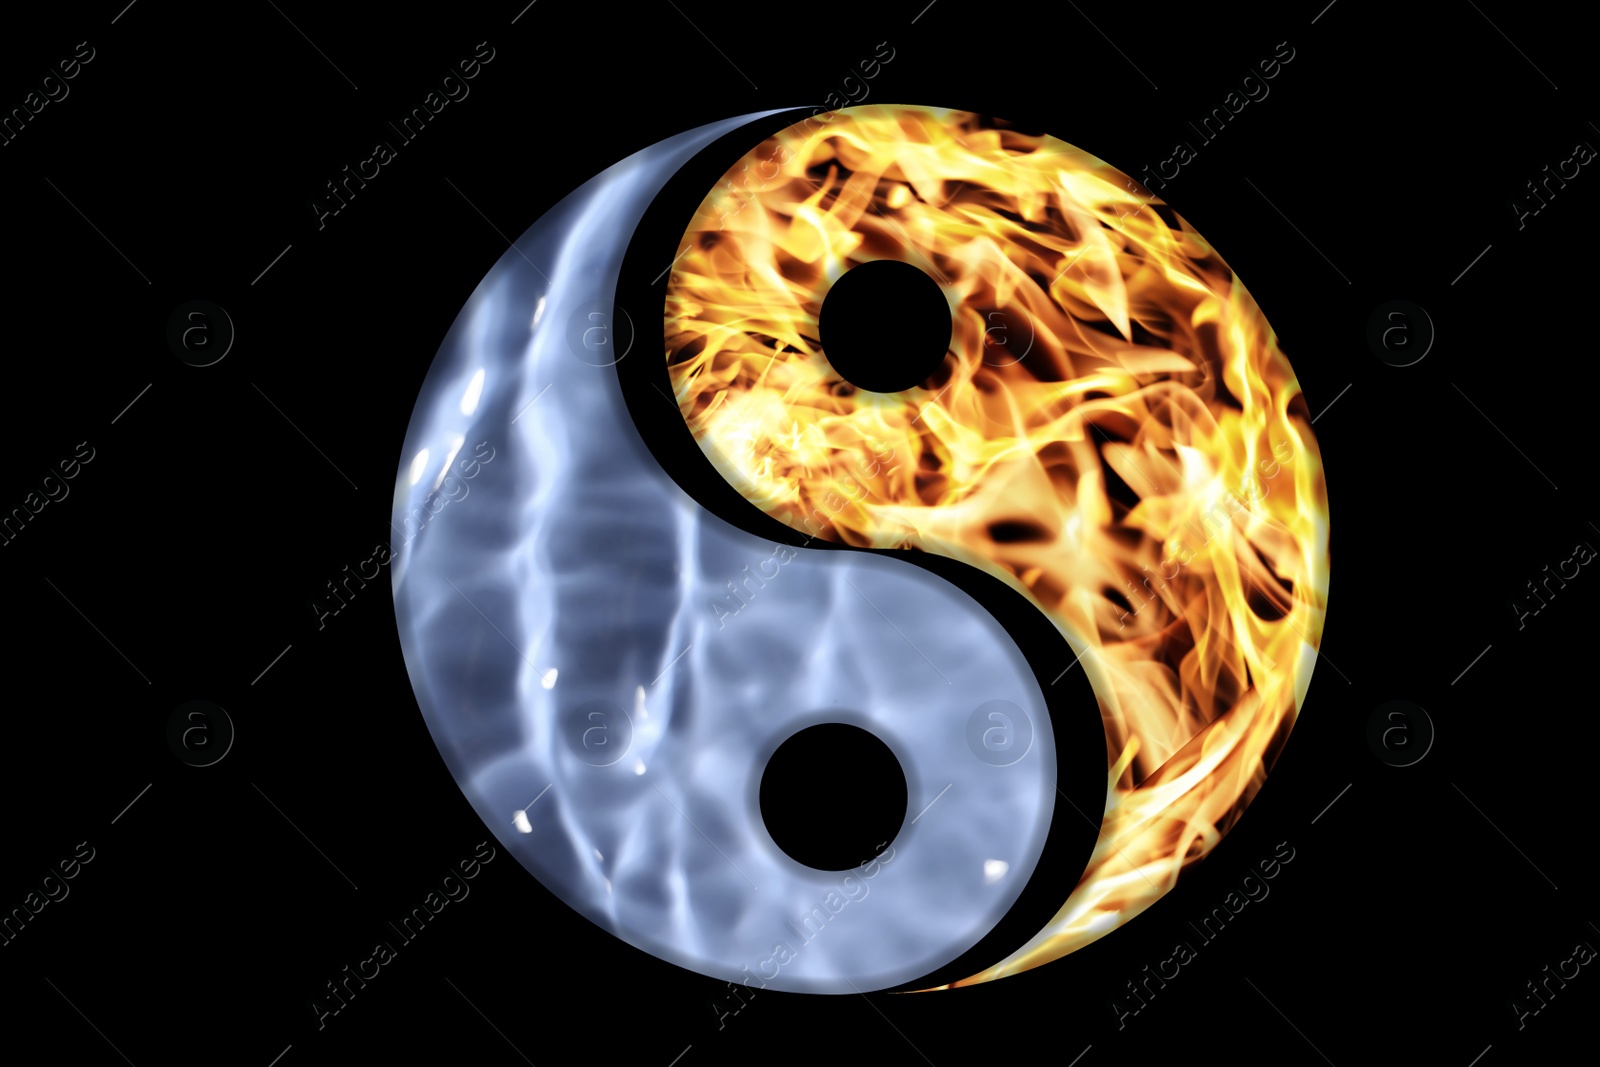 Image of Fire and water resembling Yin Yang symbol on black background. Feng Shui philosophy